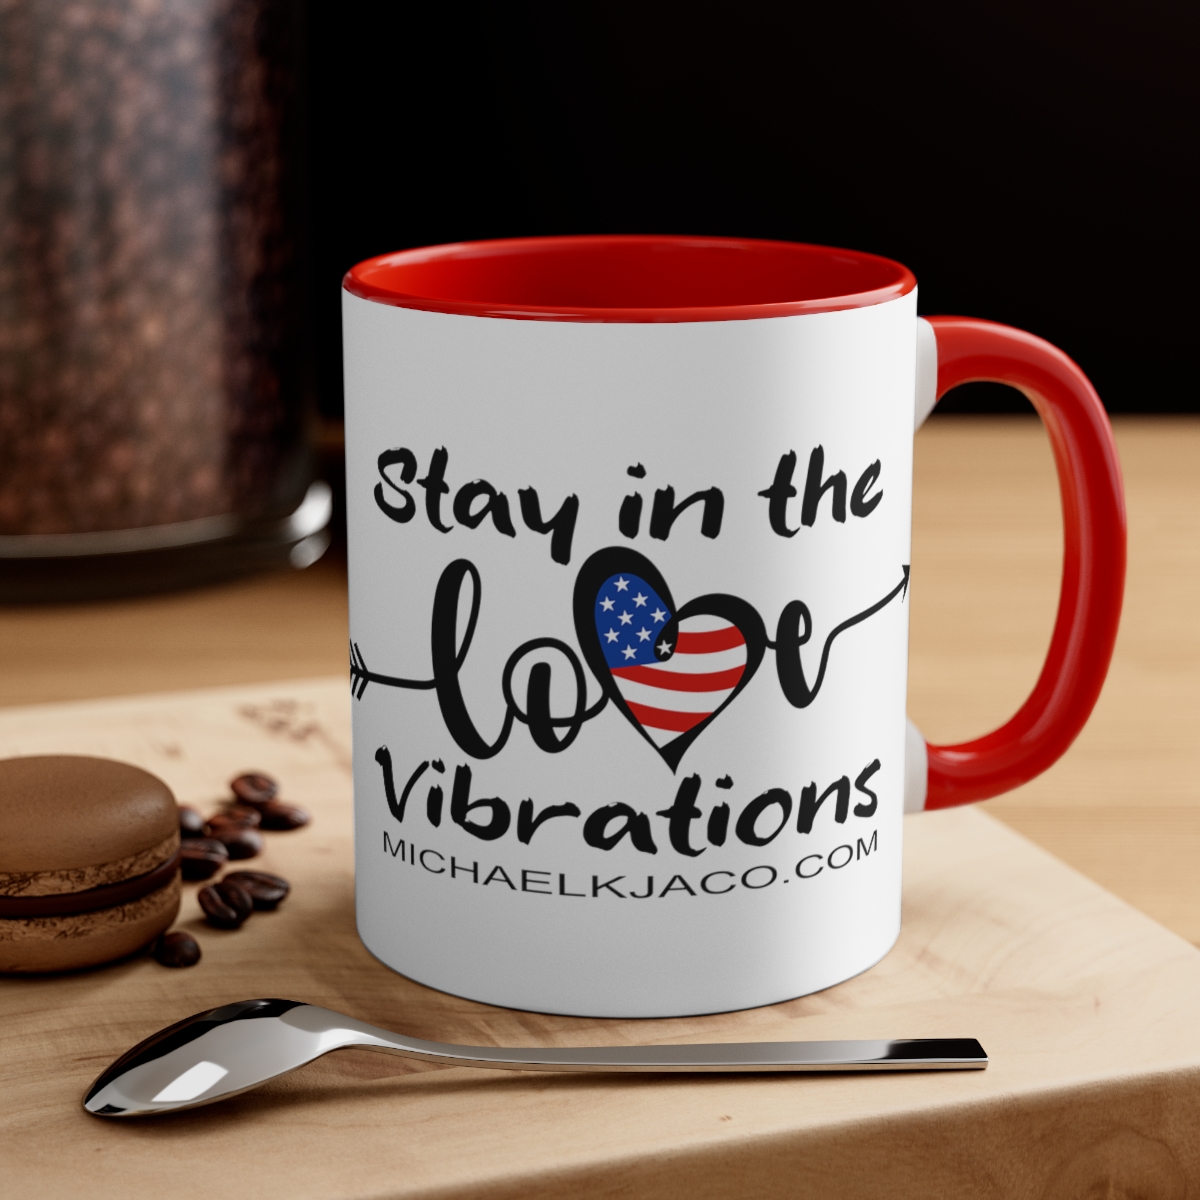 STAY IN THE LOVE VIBRATIONS ACCENT CERAMIC 110Z MUG